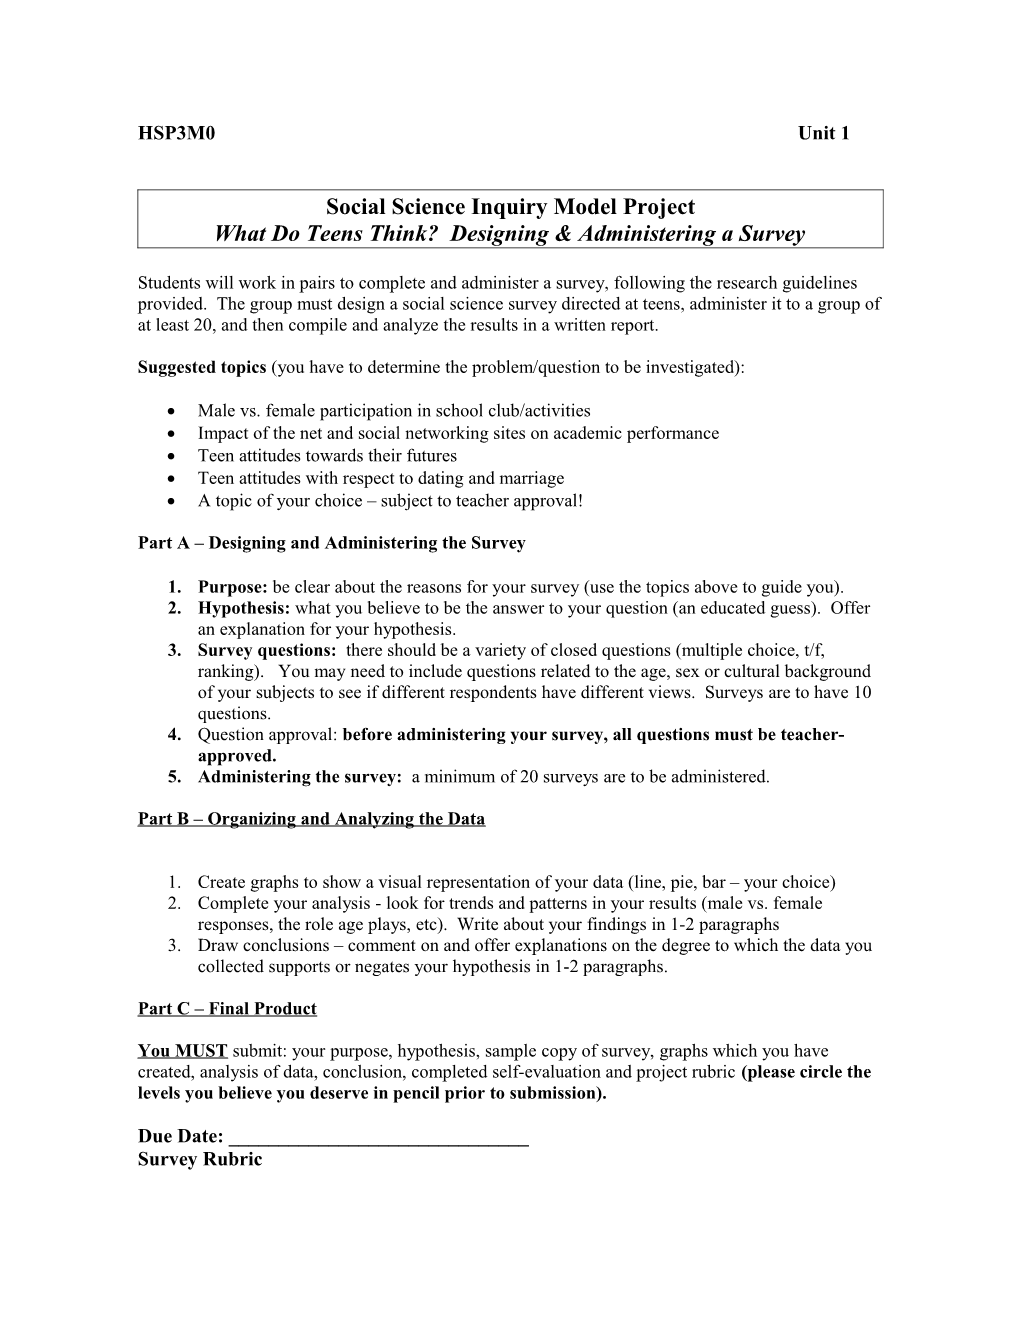 Social Science Inquiry Model Project